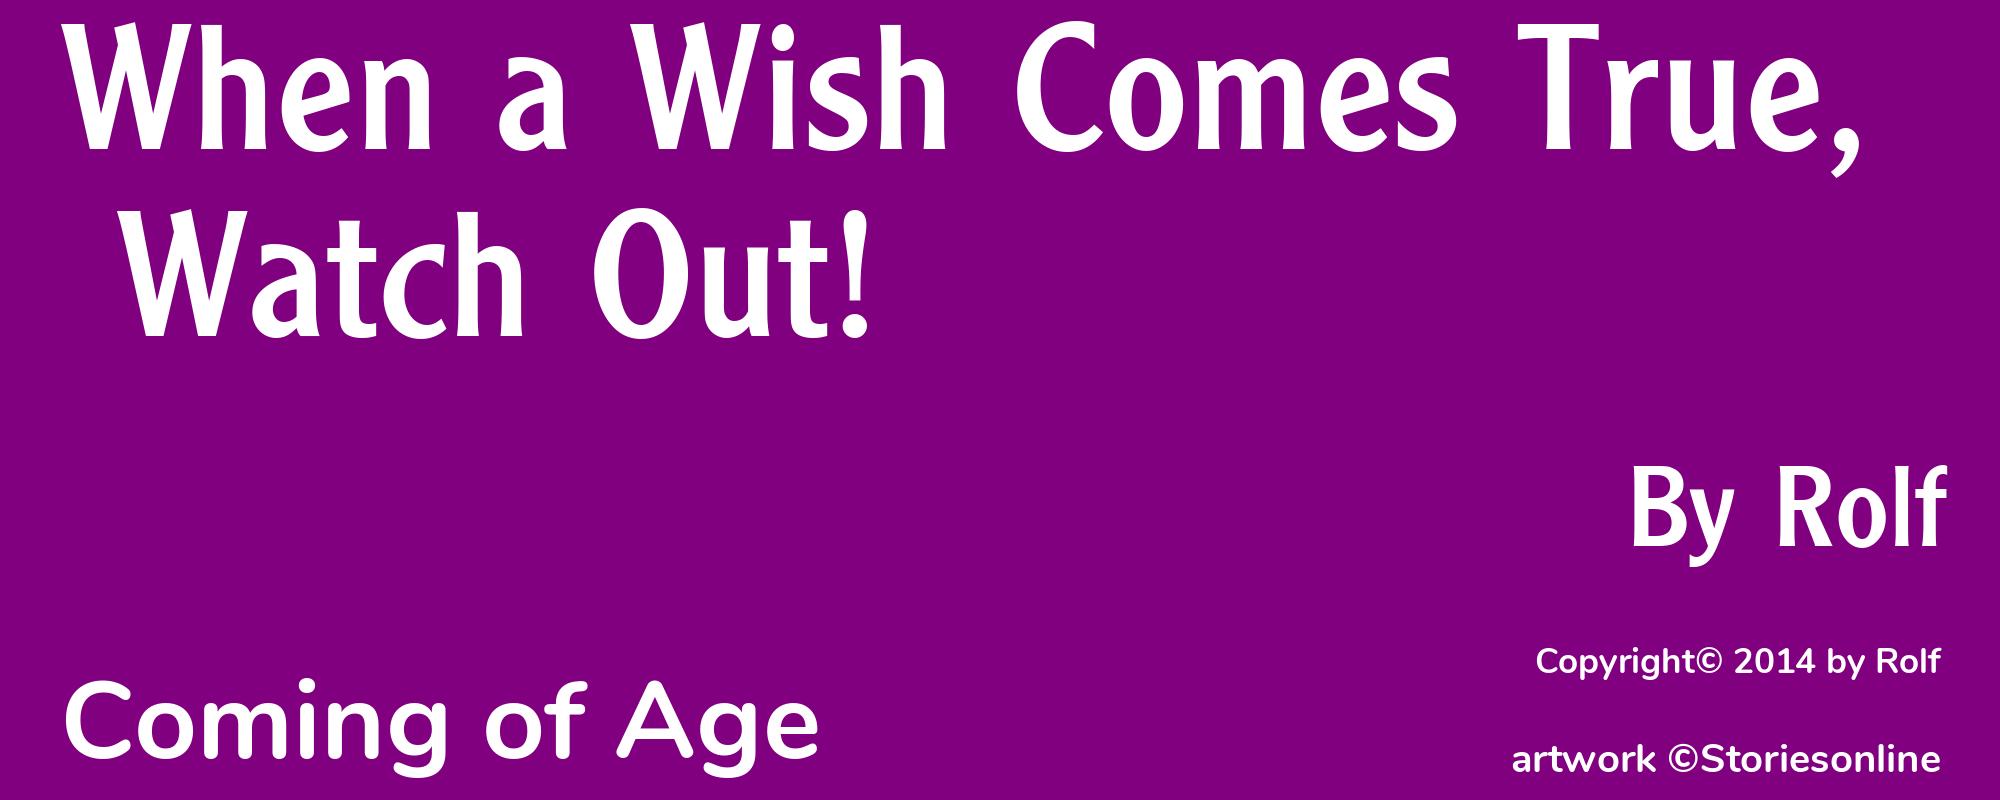 When a Wish Comes True, Watch Out! - Cover